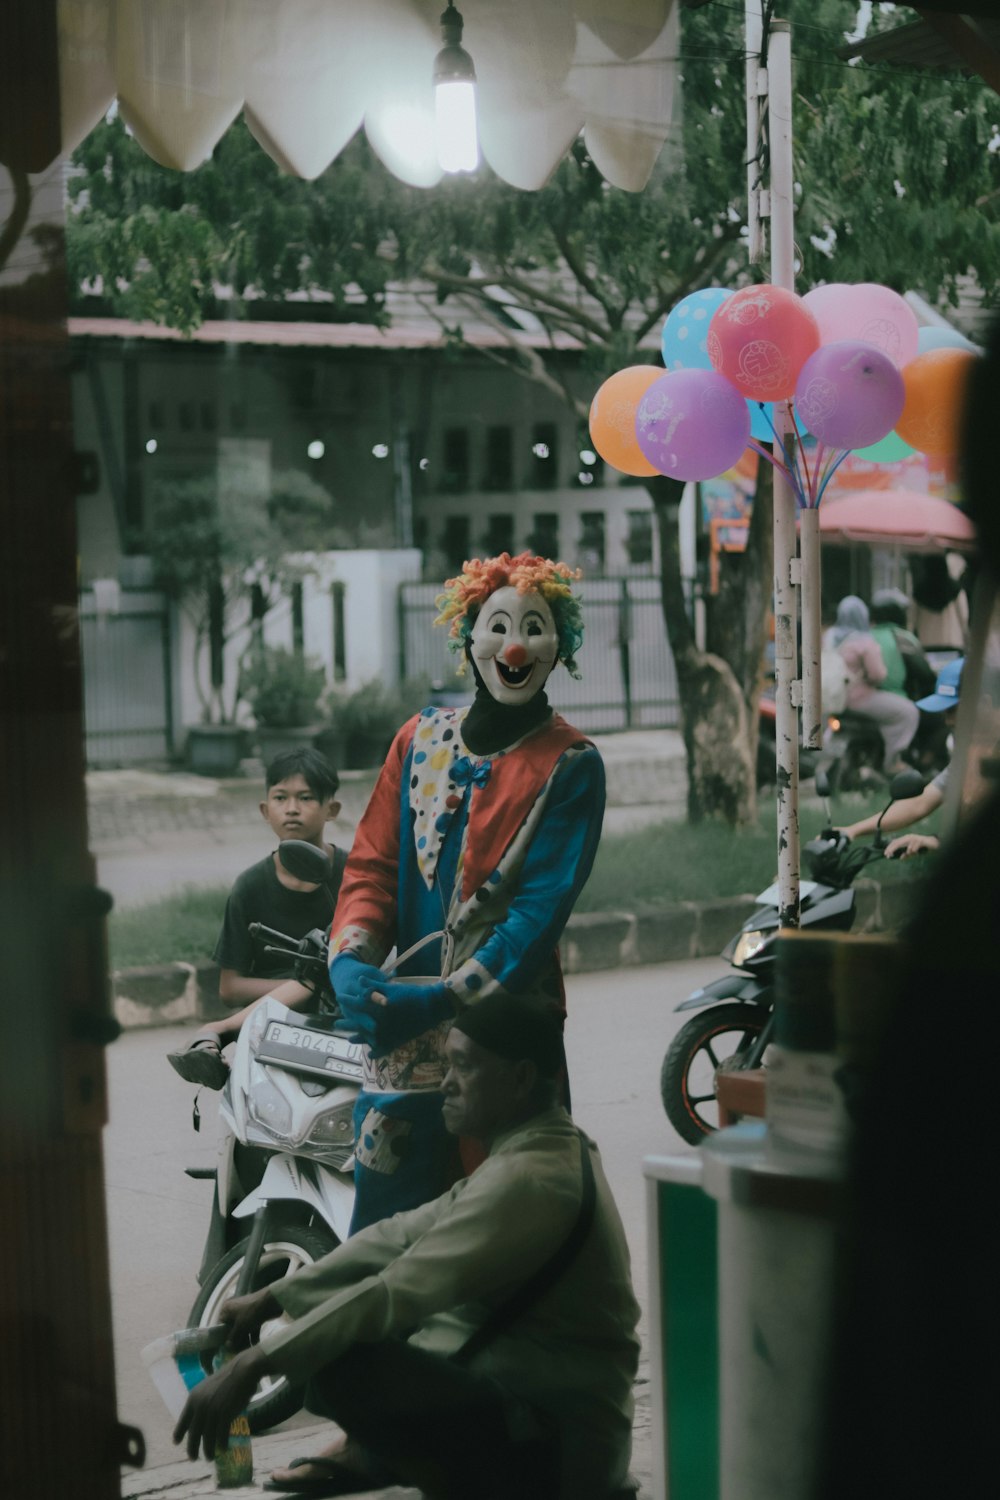 a clown is riding a motorcycle on the street